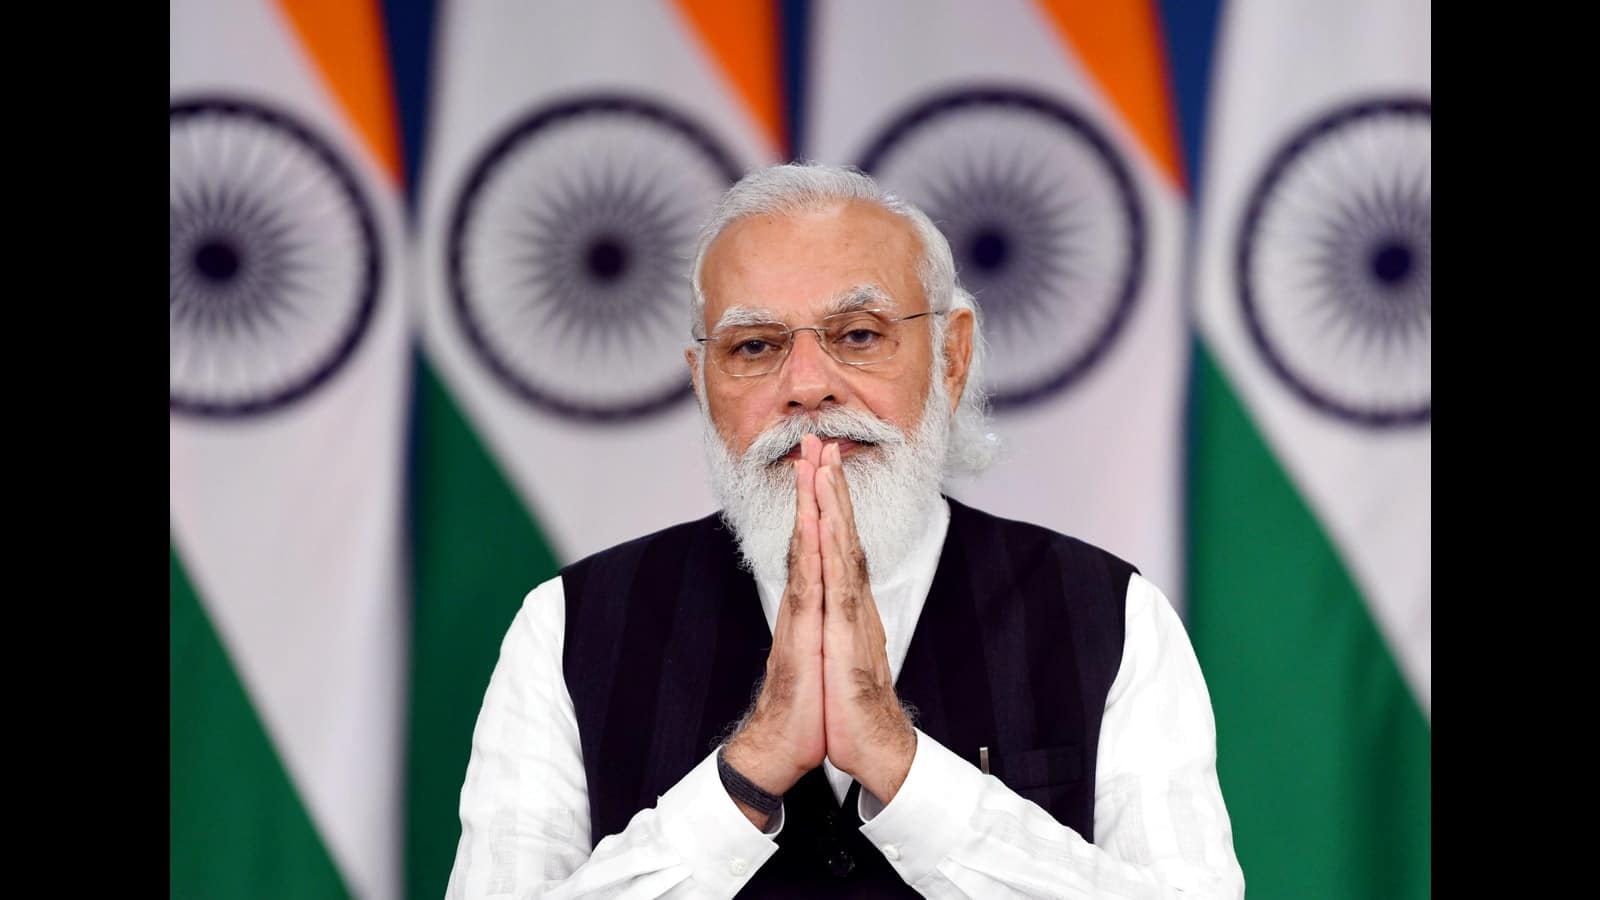 PM Narendra Modi Net Worth Wealth Of Our Prime Minister, Assets, Life